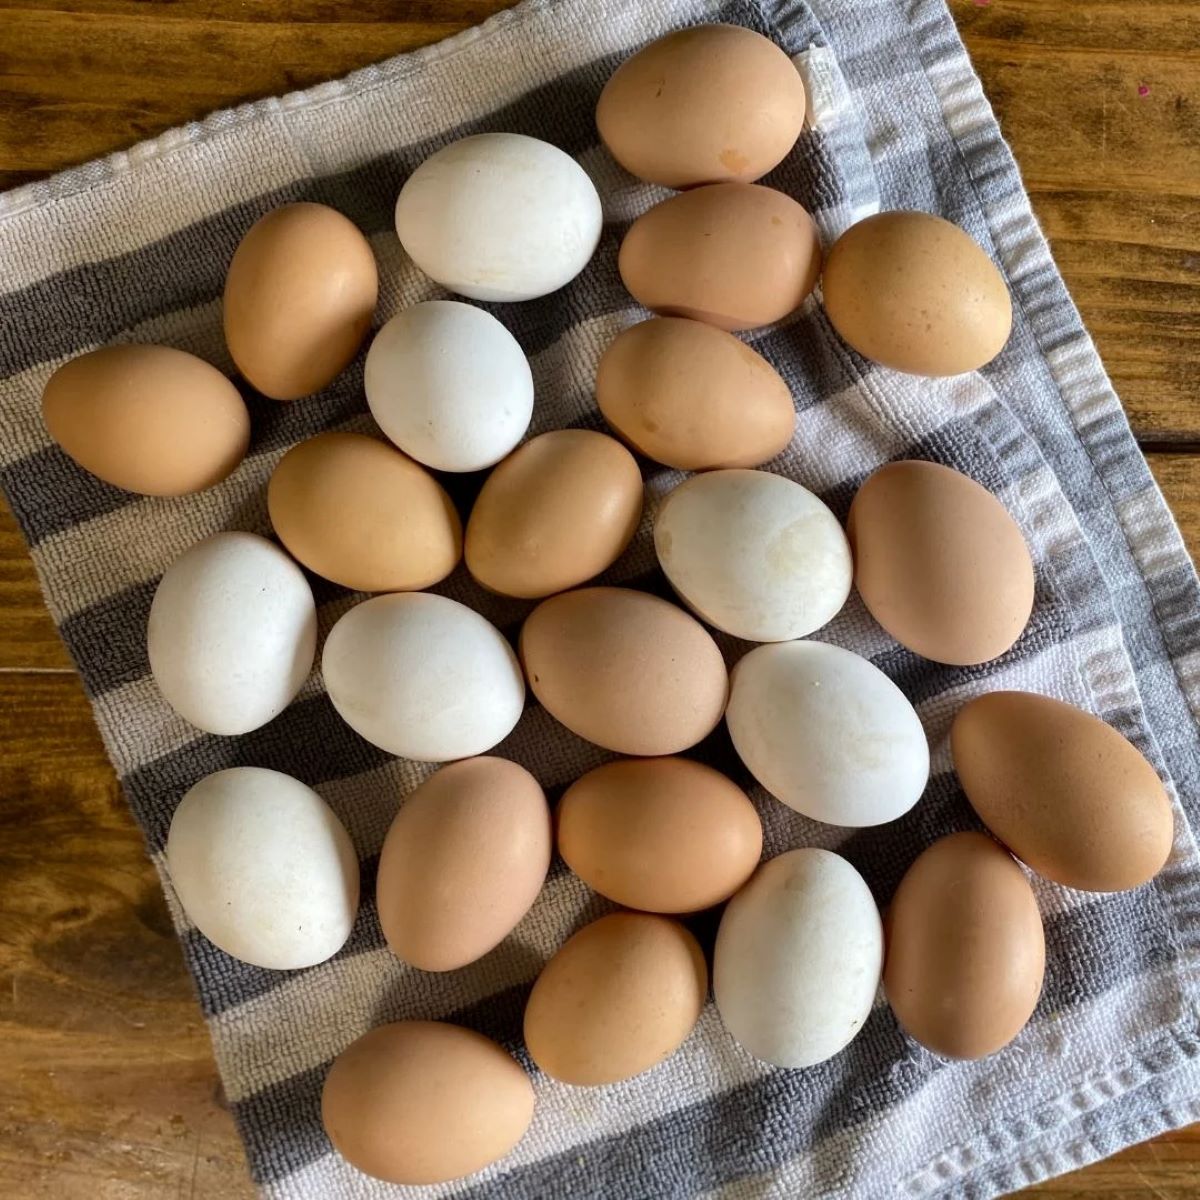 How To Store Fresh Eggs?